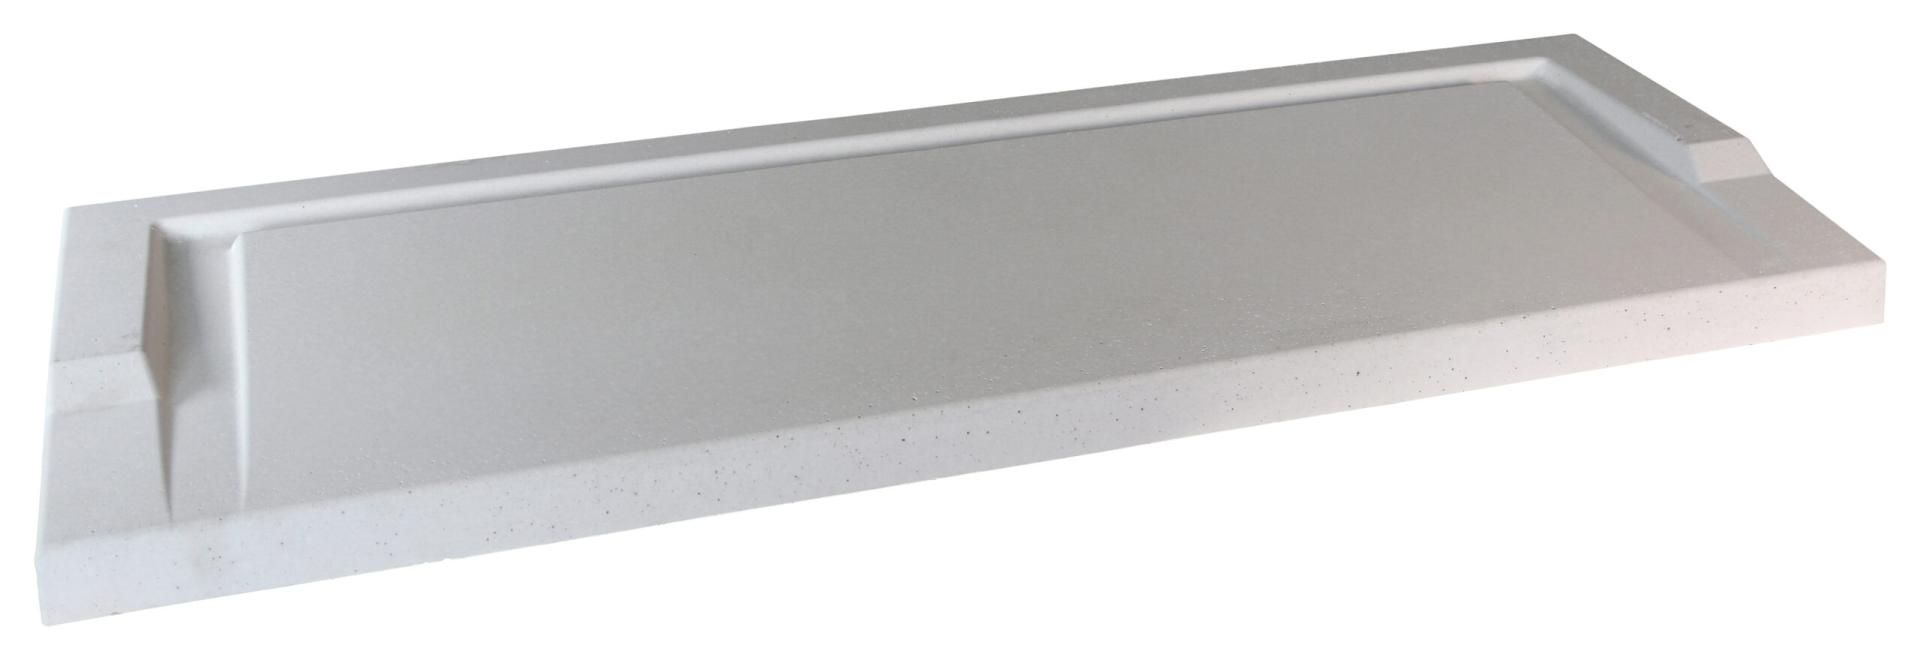 seuil-beton-pmr-lisse-35cm-120-130-daulouede-gris-0